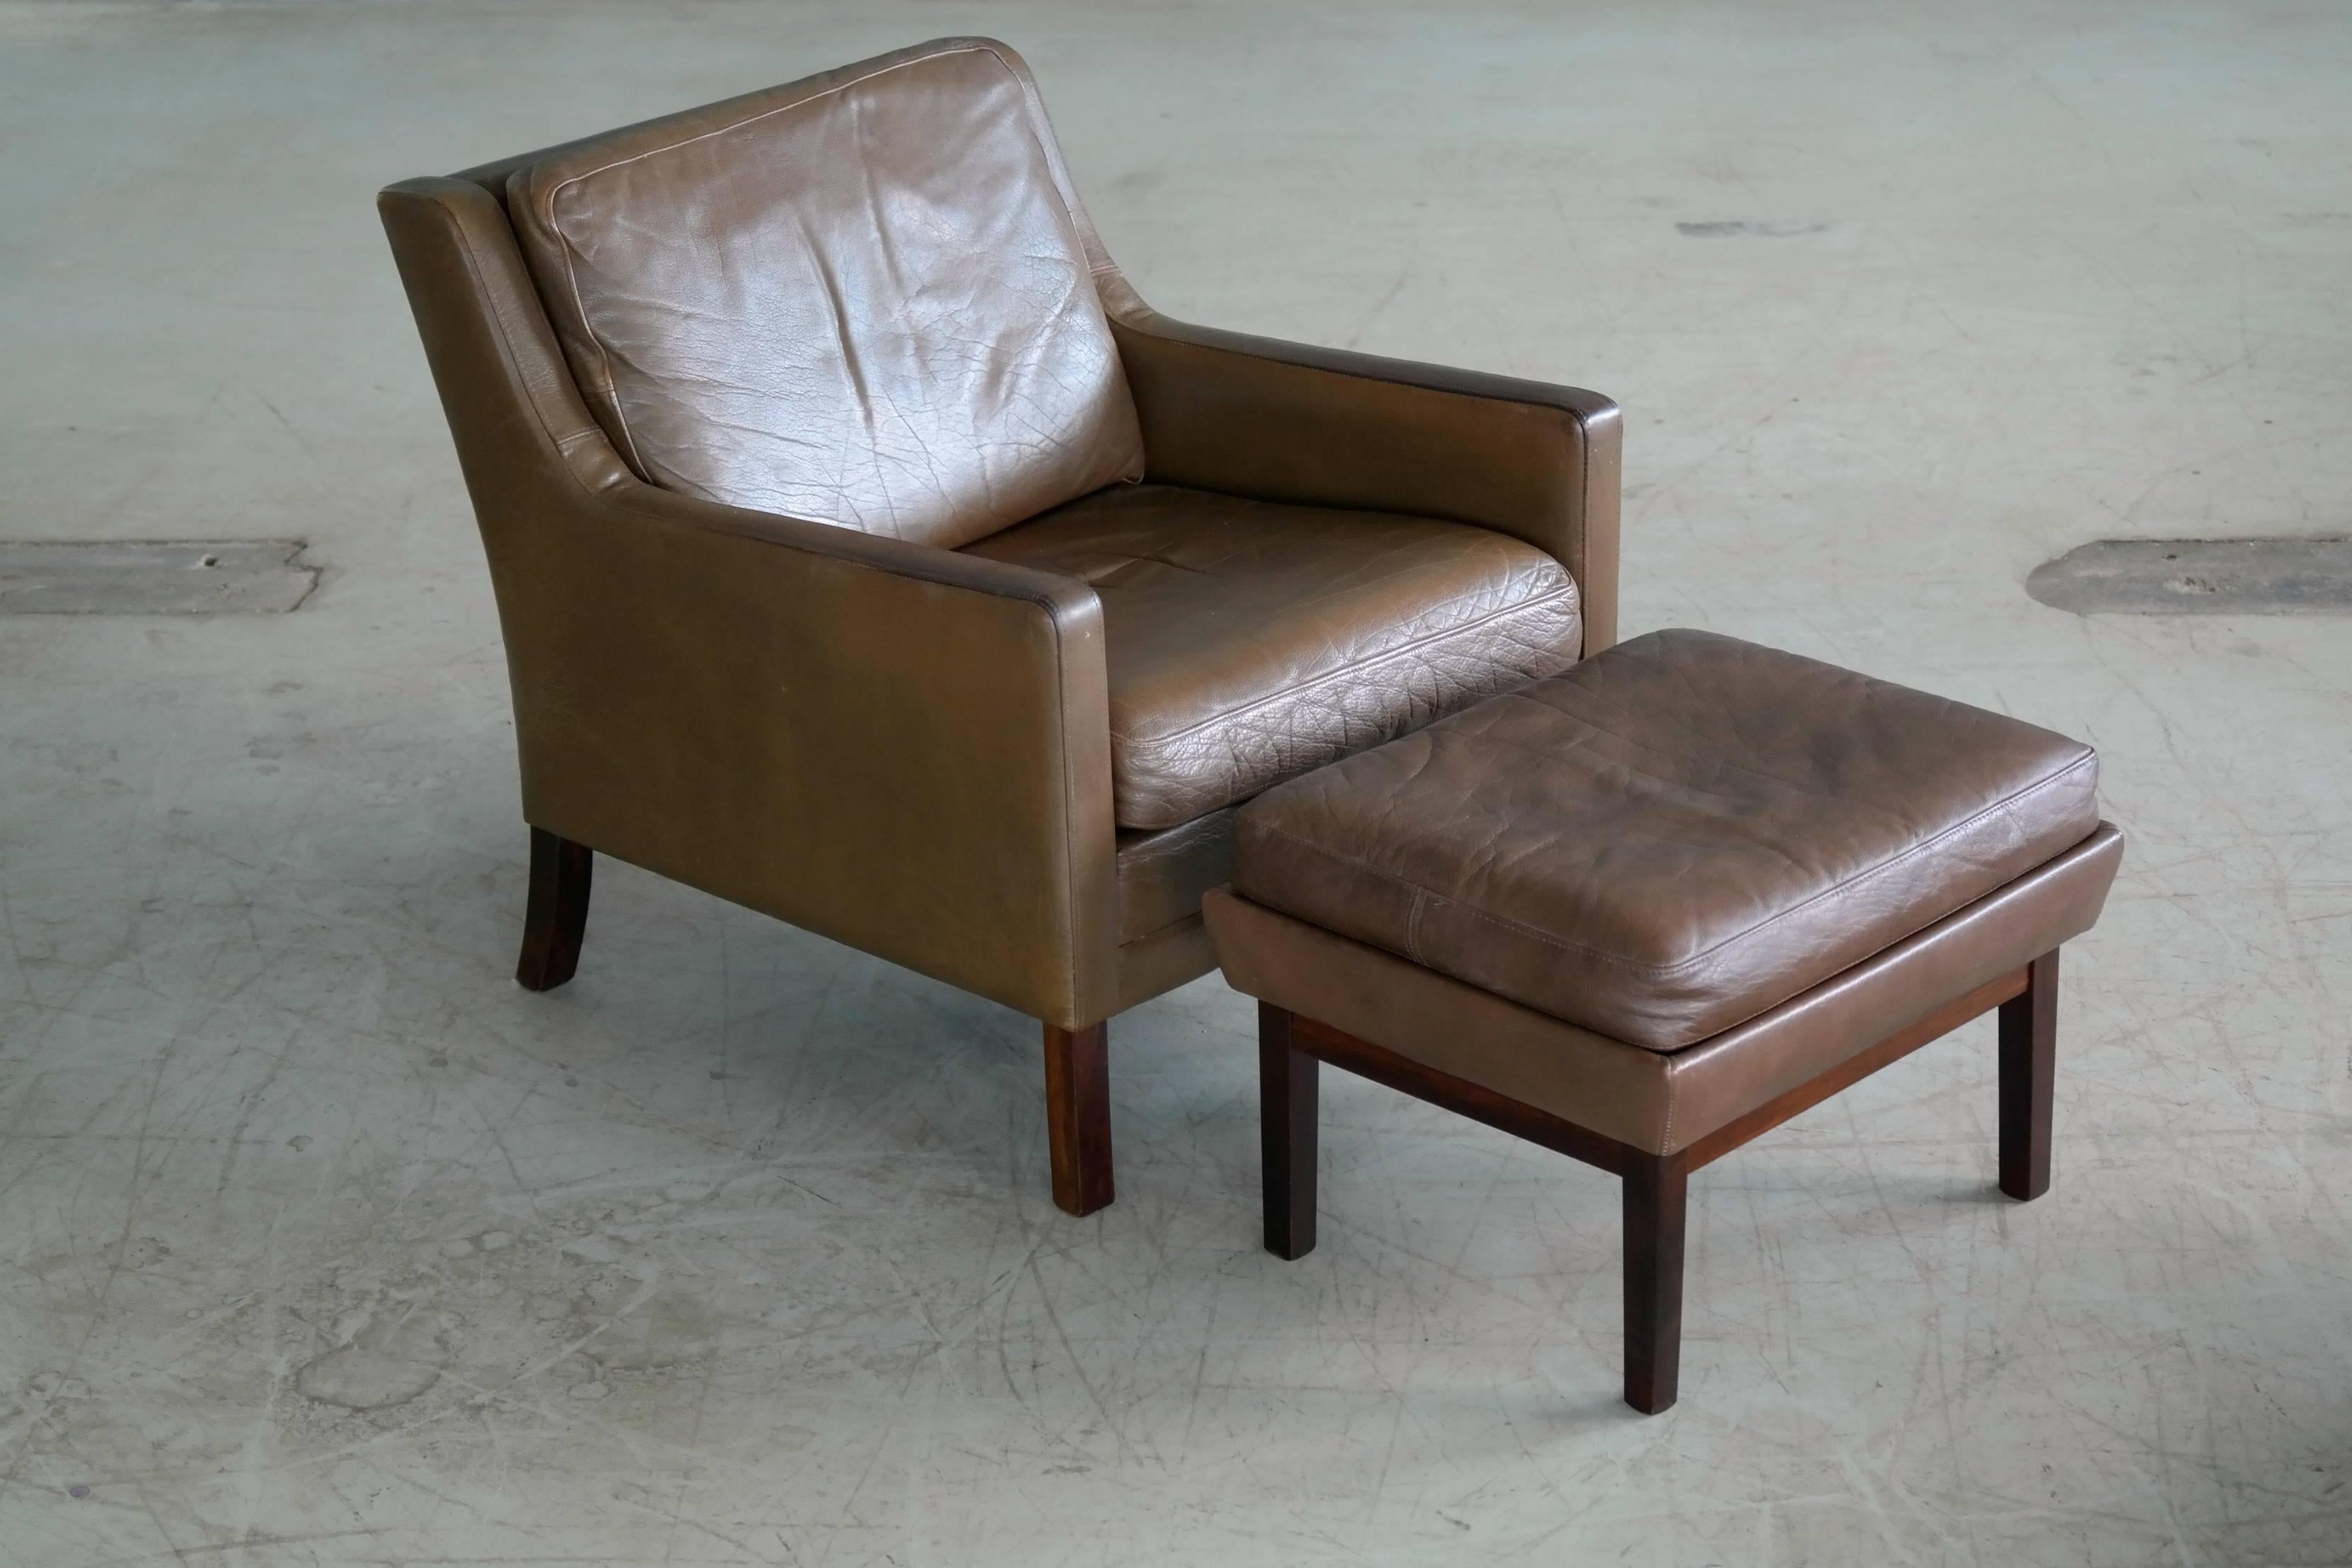 Iconic Borge Mogensen style Danish easy chair with ottoman in olive brown /green buffalo leather designed by Georg Thams in the 1960s. The thicks buffalo hide shows nice wear and patina throughout and the color has faded to show both olive green and